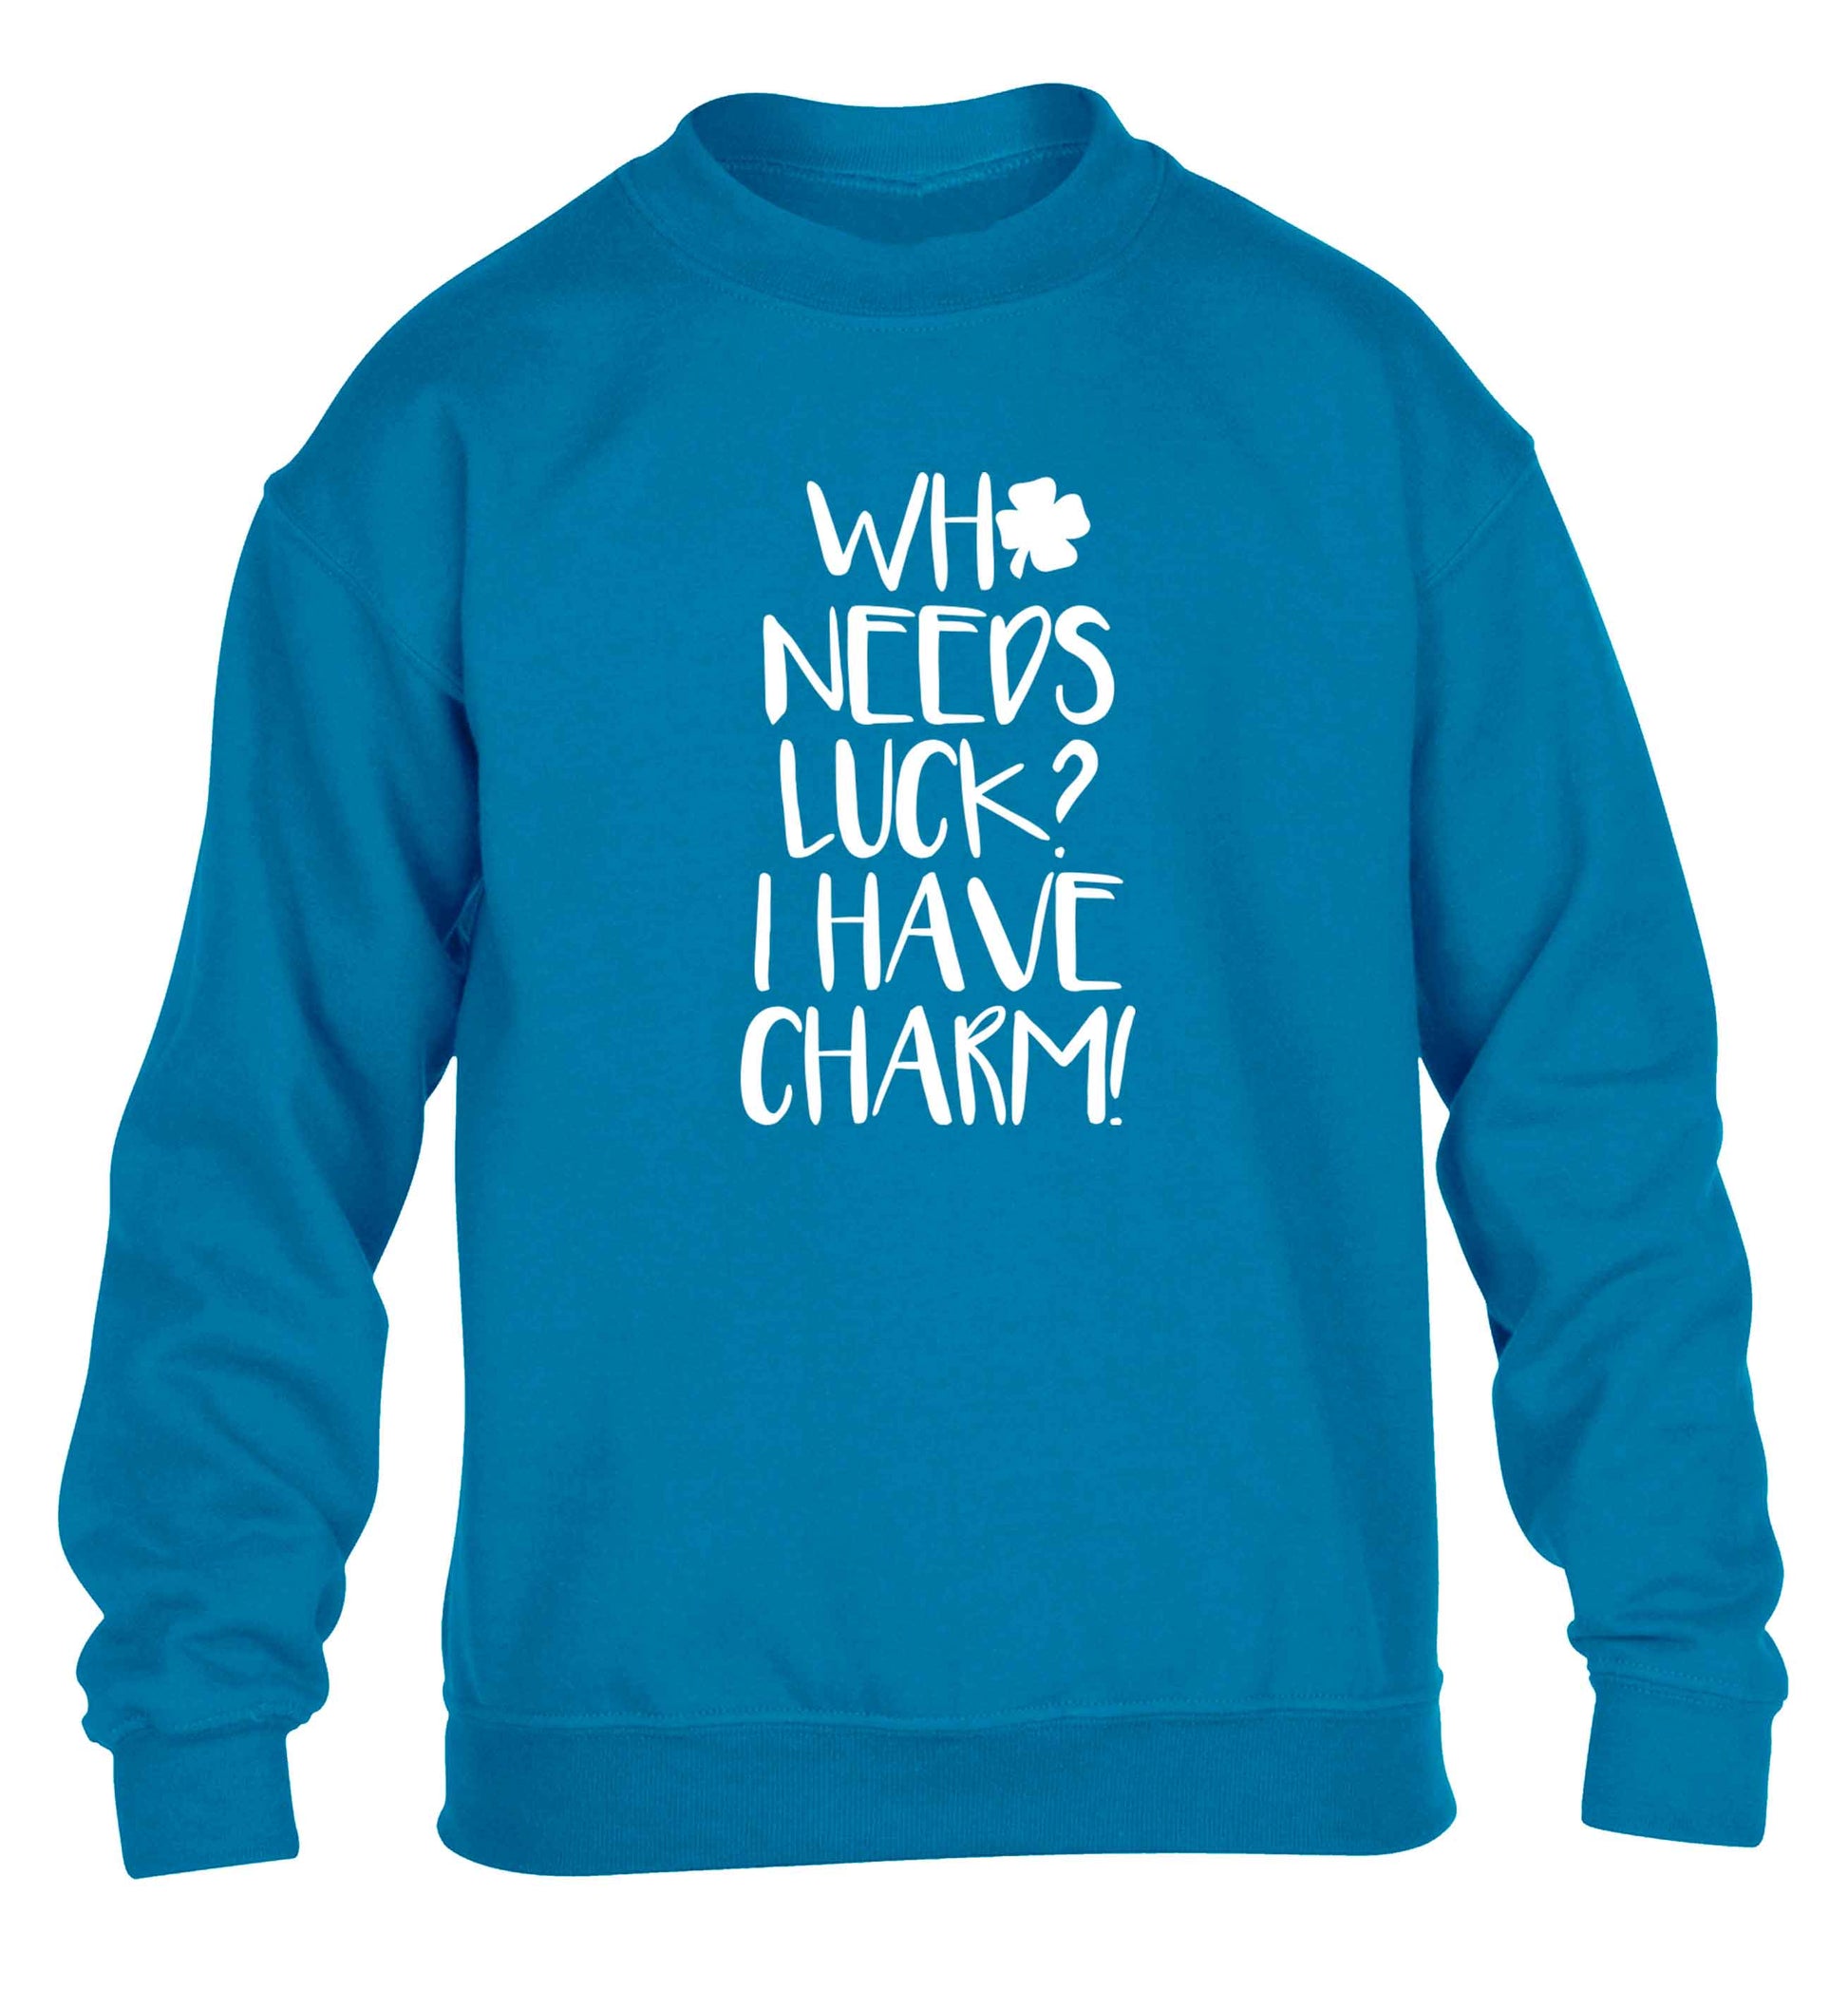 Who needs luck? I have charm! children's blue sweater 12-13 Years